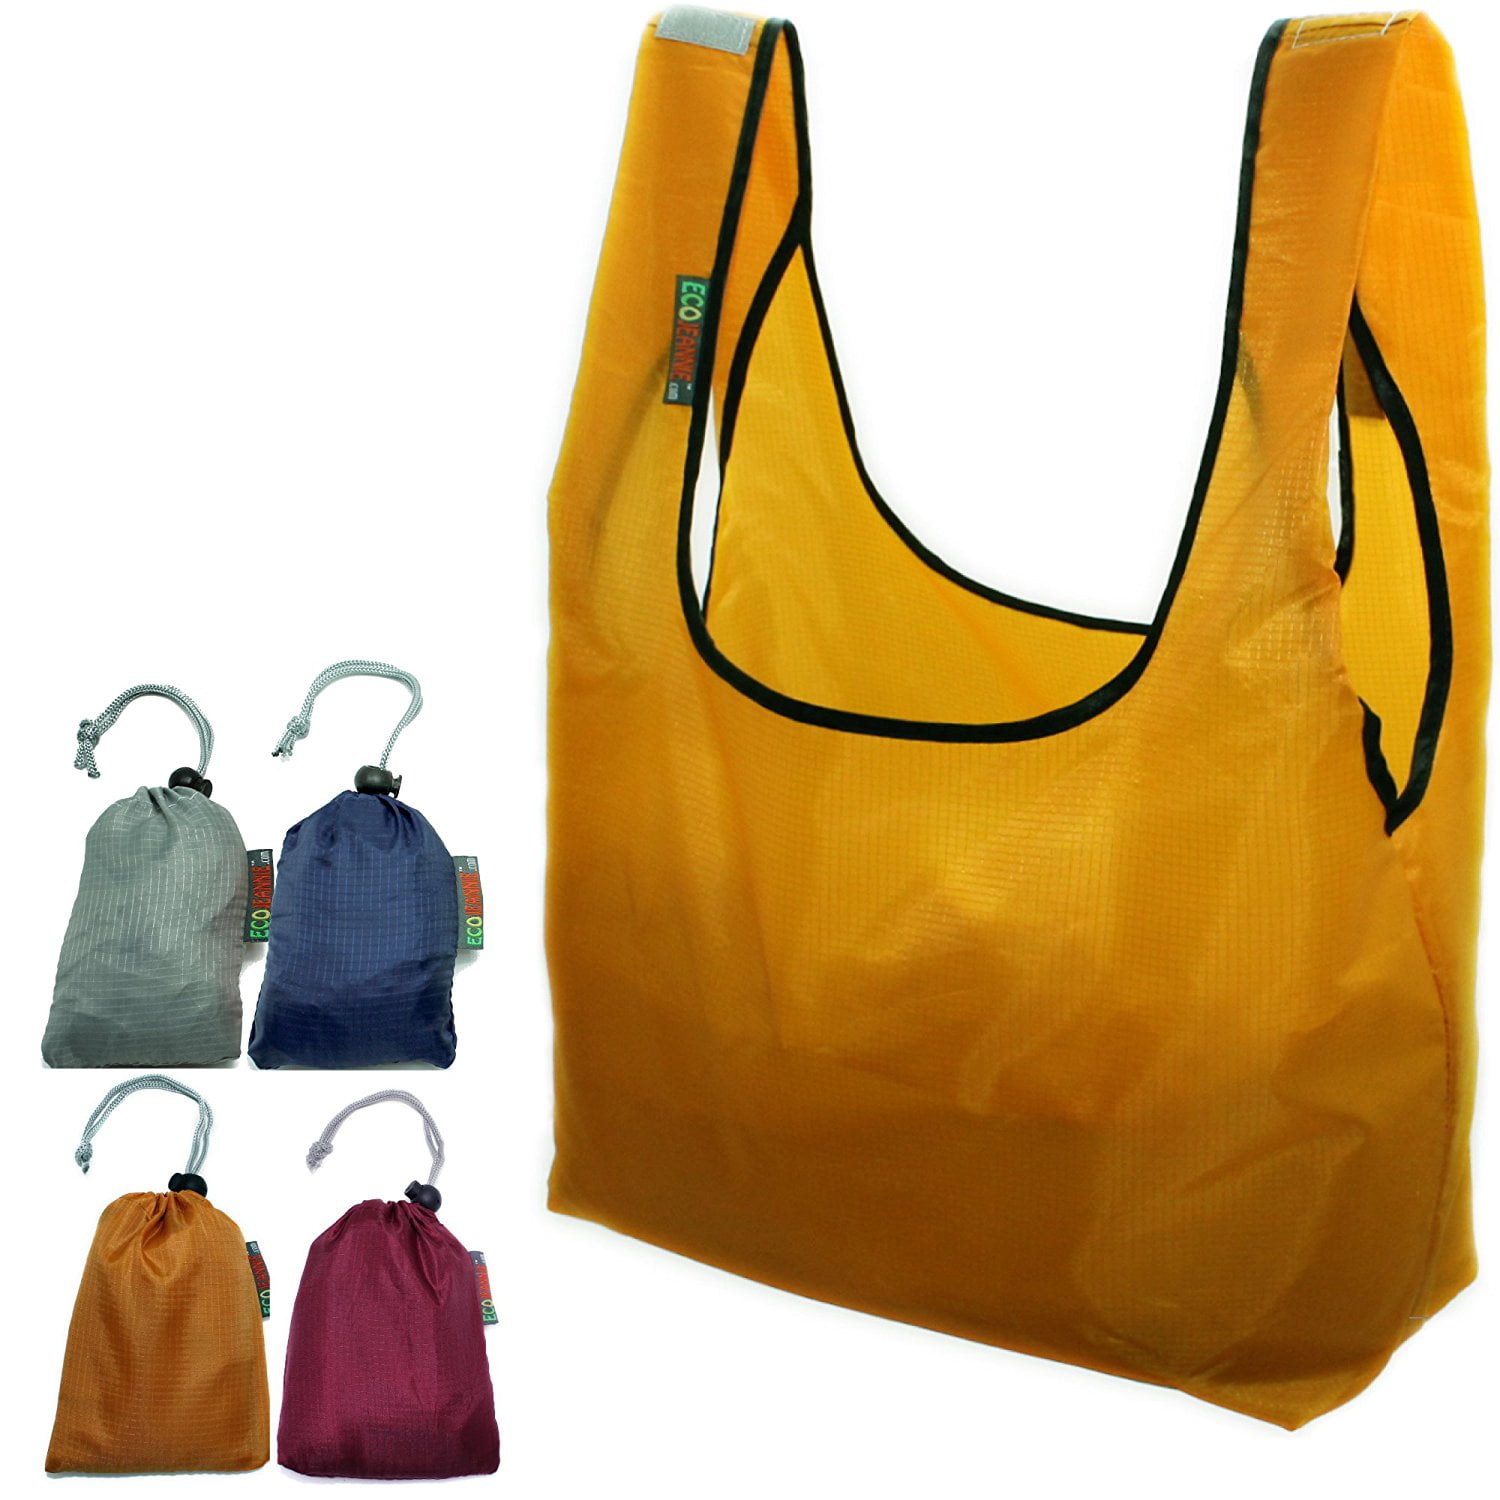 PATENT PENDING EcoJeannie 3 Pack Large Super Strong Ripstop Nylon Foldable Bag 